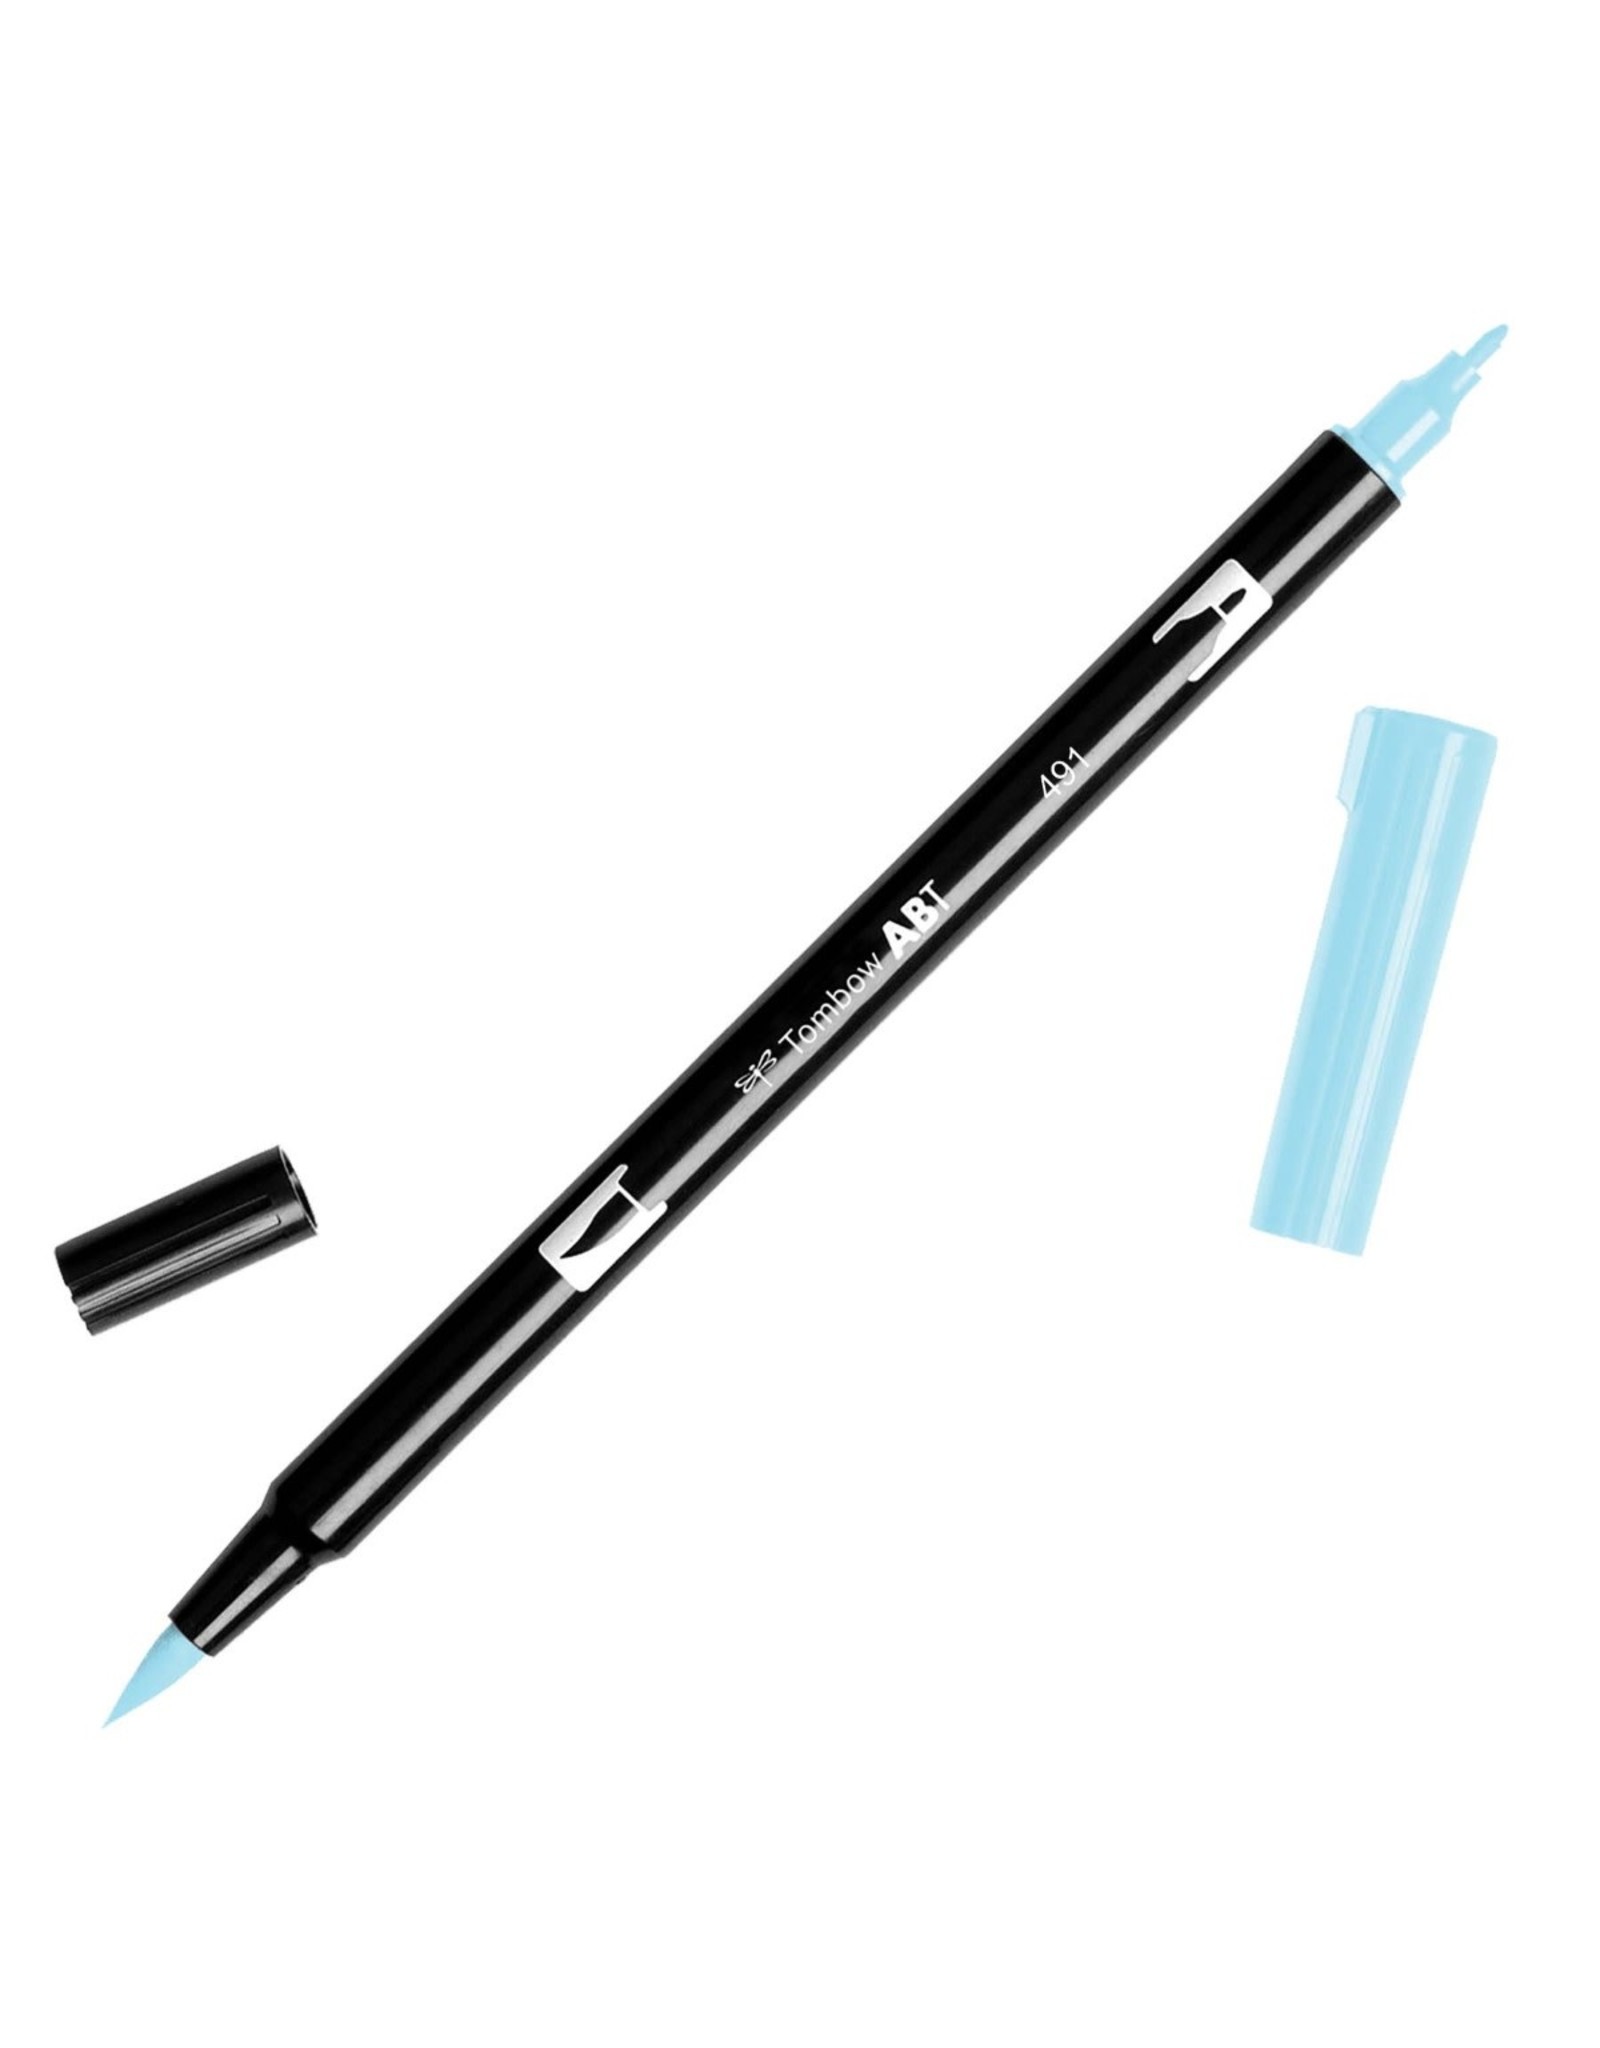 TOMBOW TOMBOW ABT-491 GLACIER BLUE DUAL BRUSH MARKER